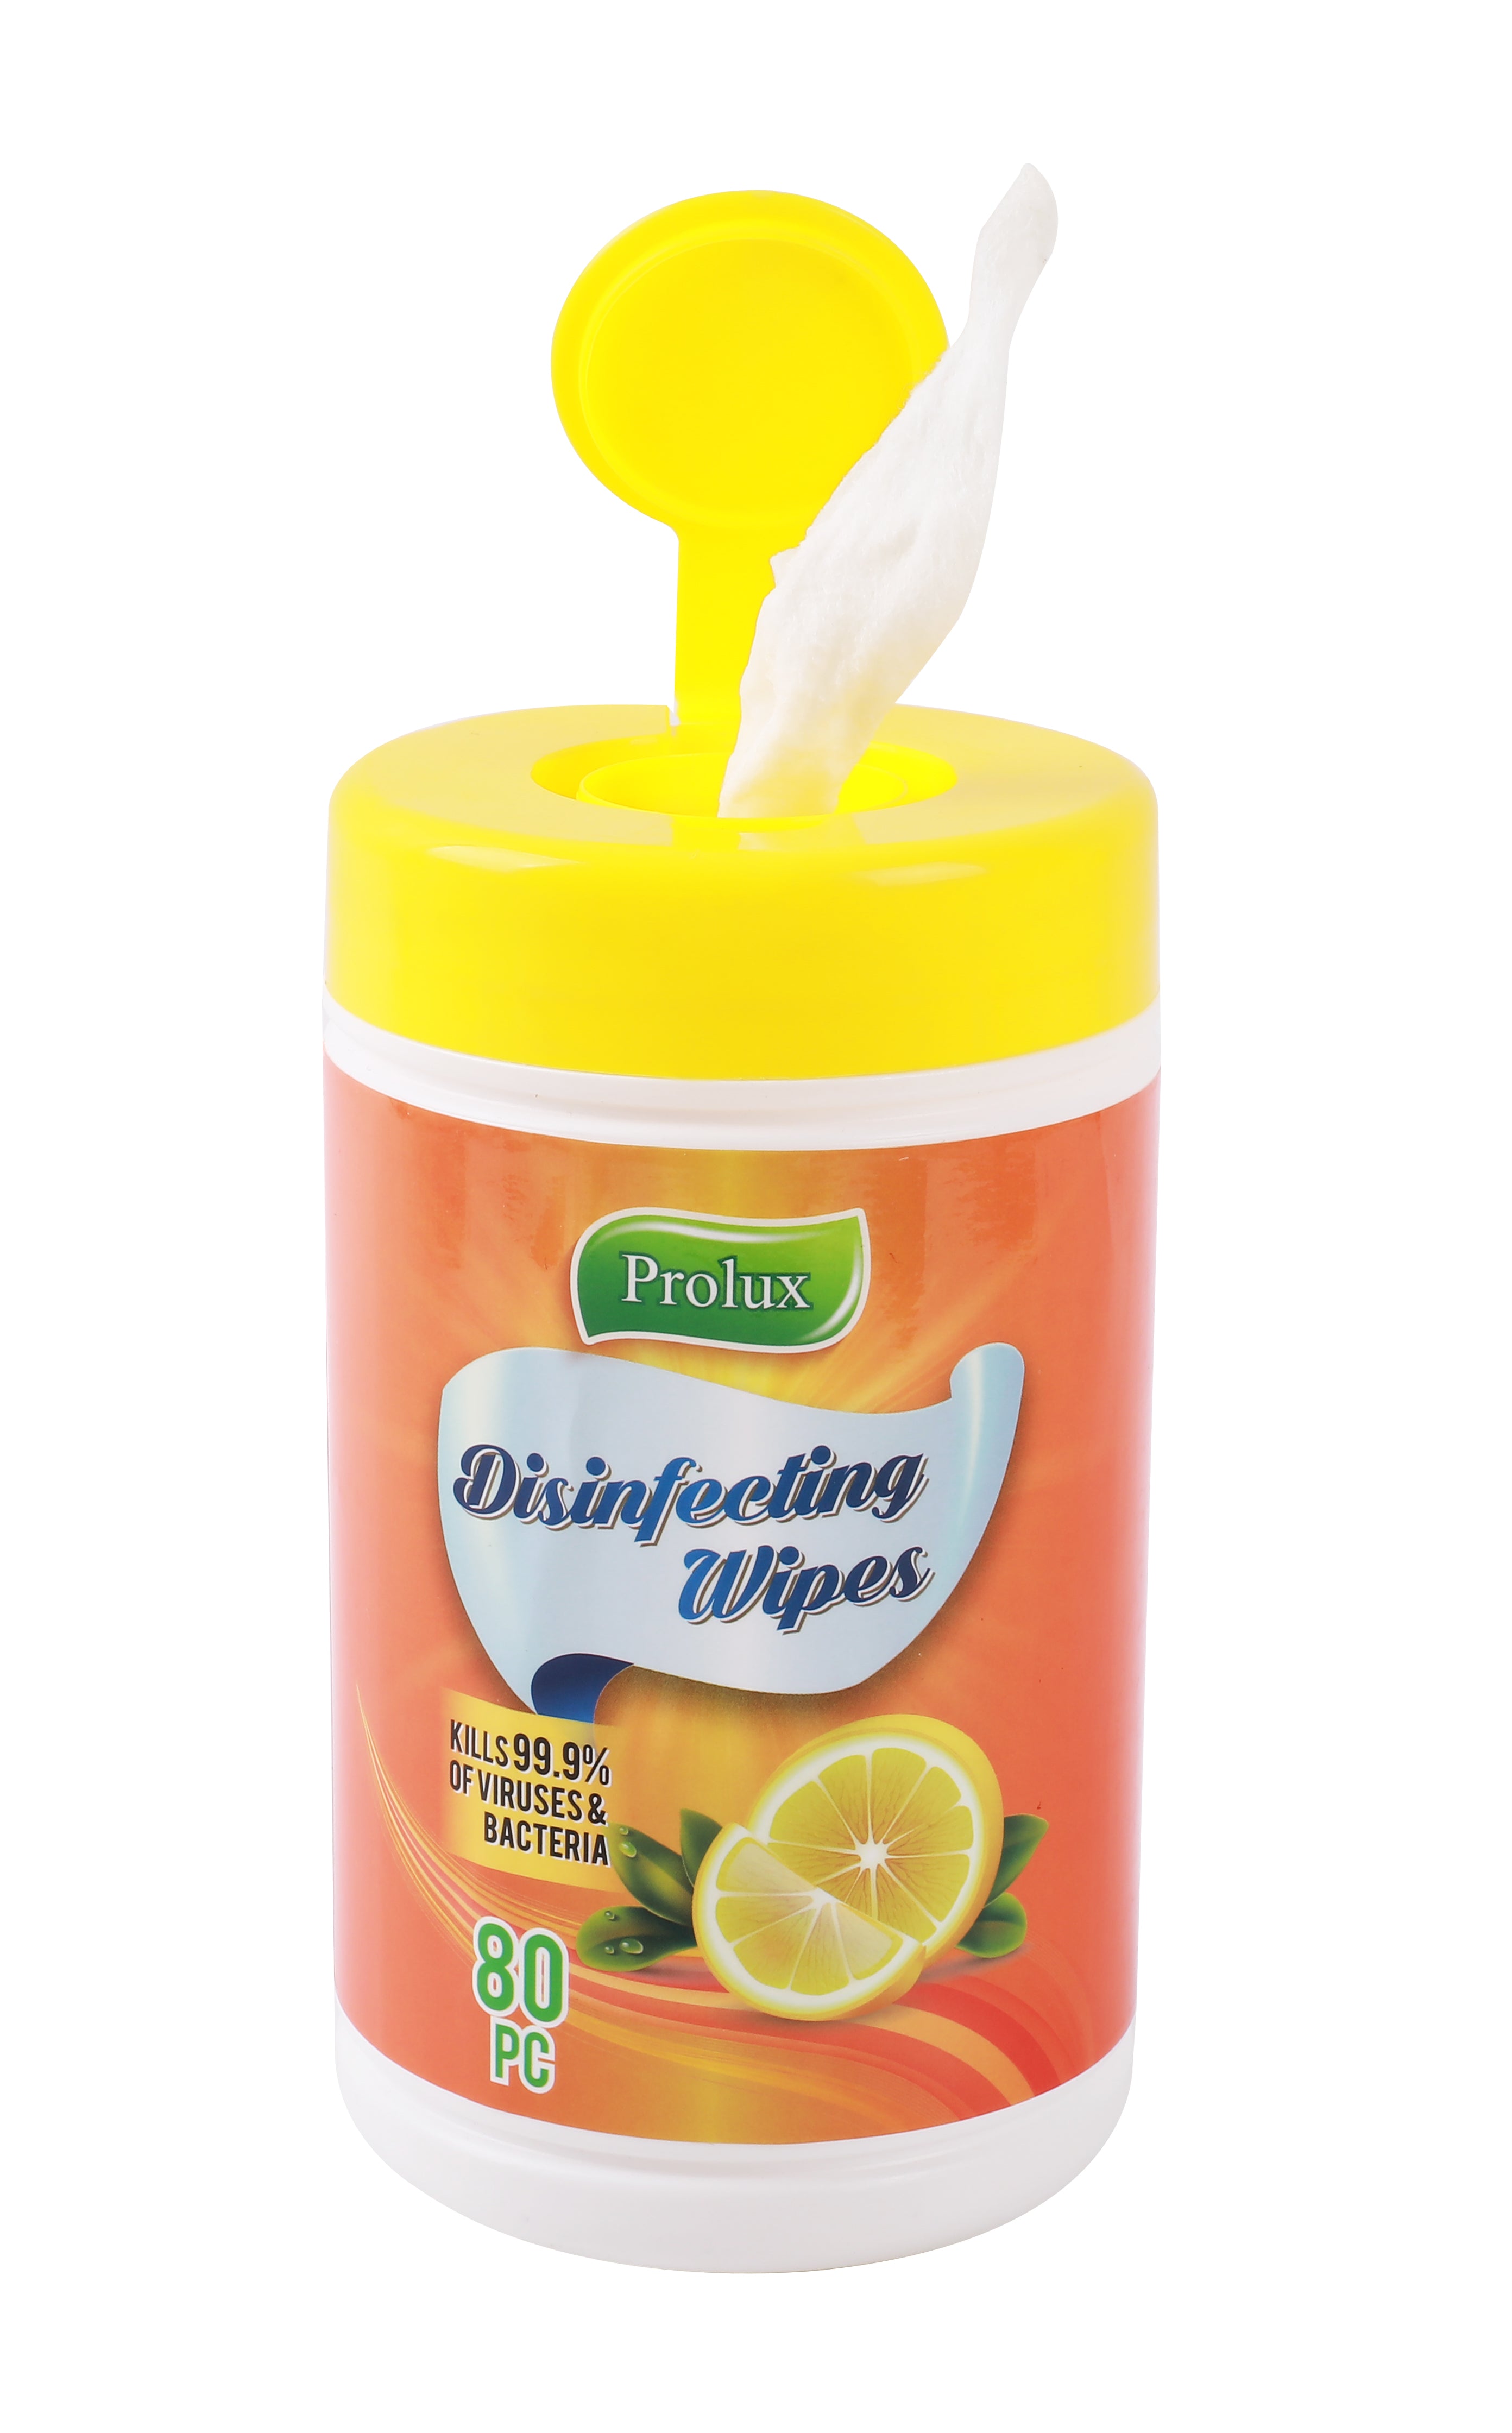 wipes plus disinfecting wipes 2